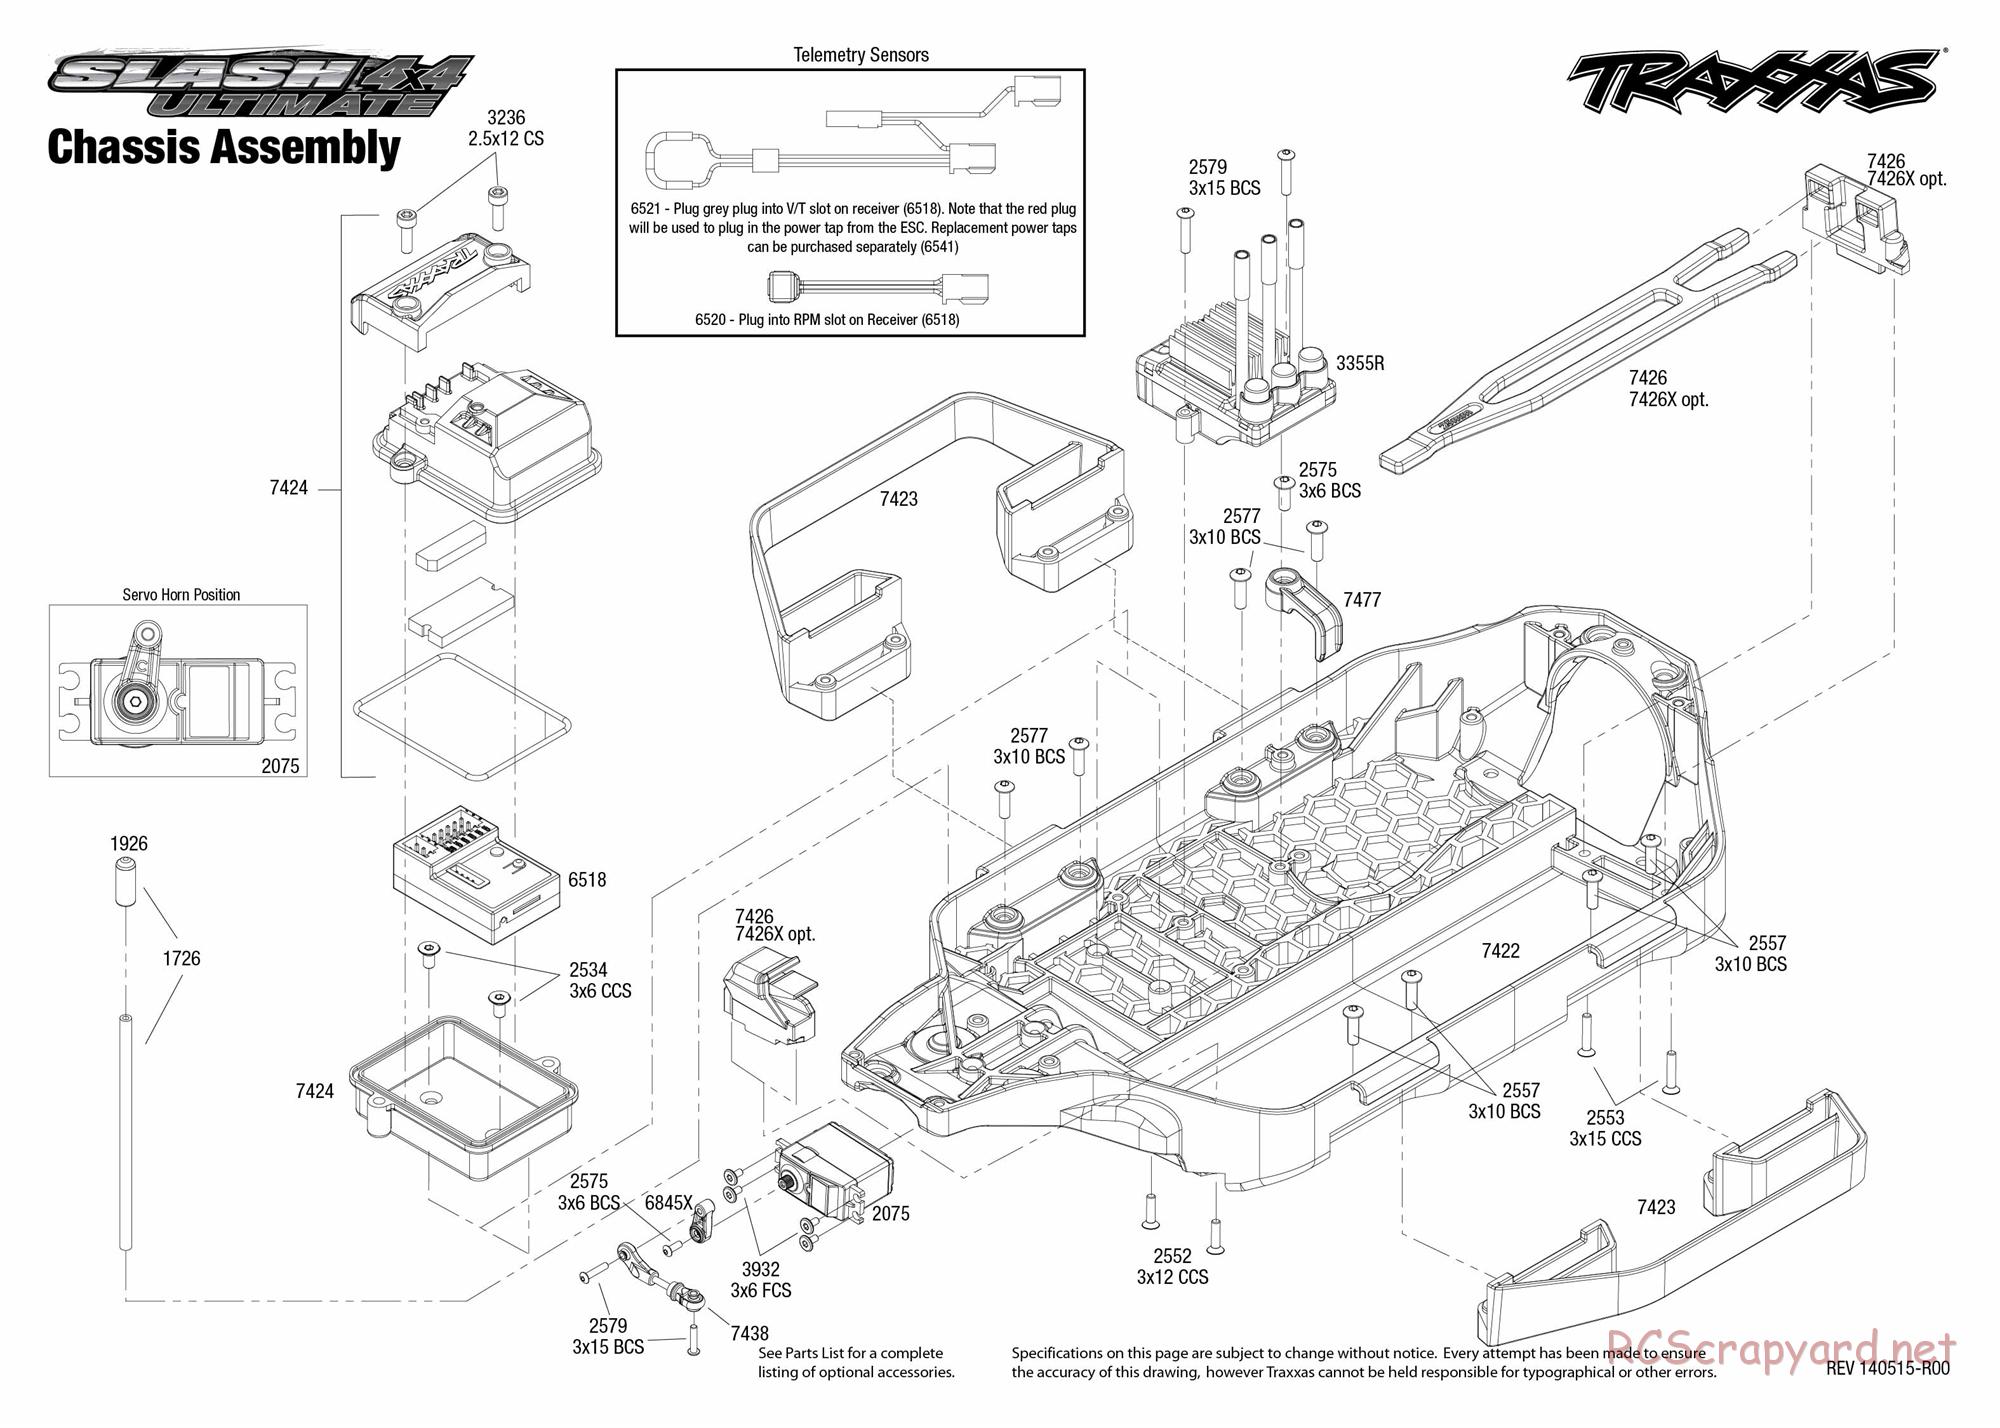 Traxxas - Slash 4x4 Ultimate (2014) - Exploded Views - Page 1